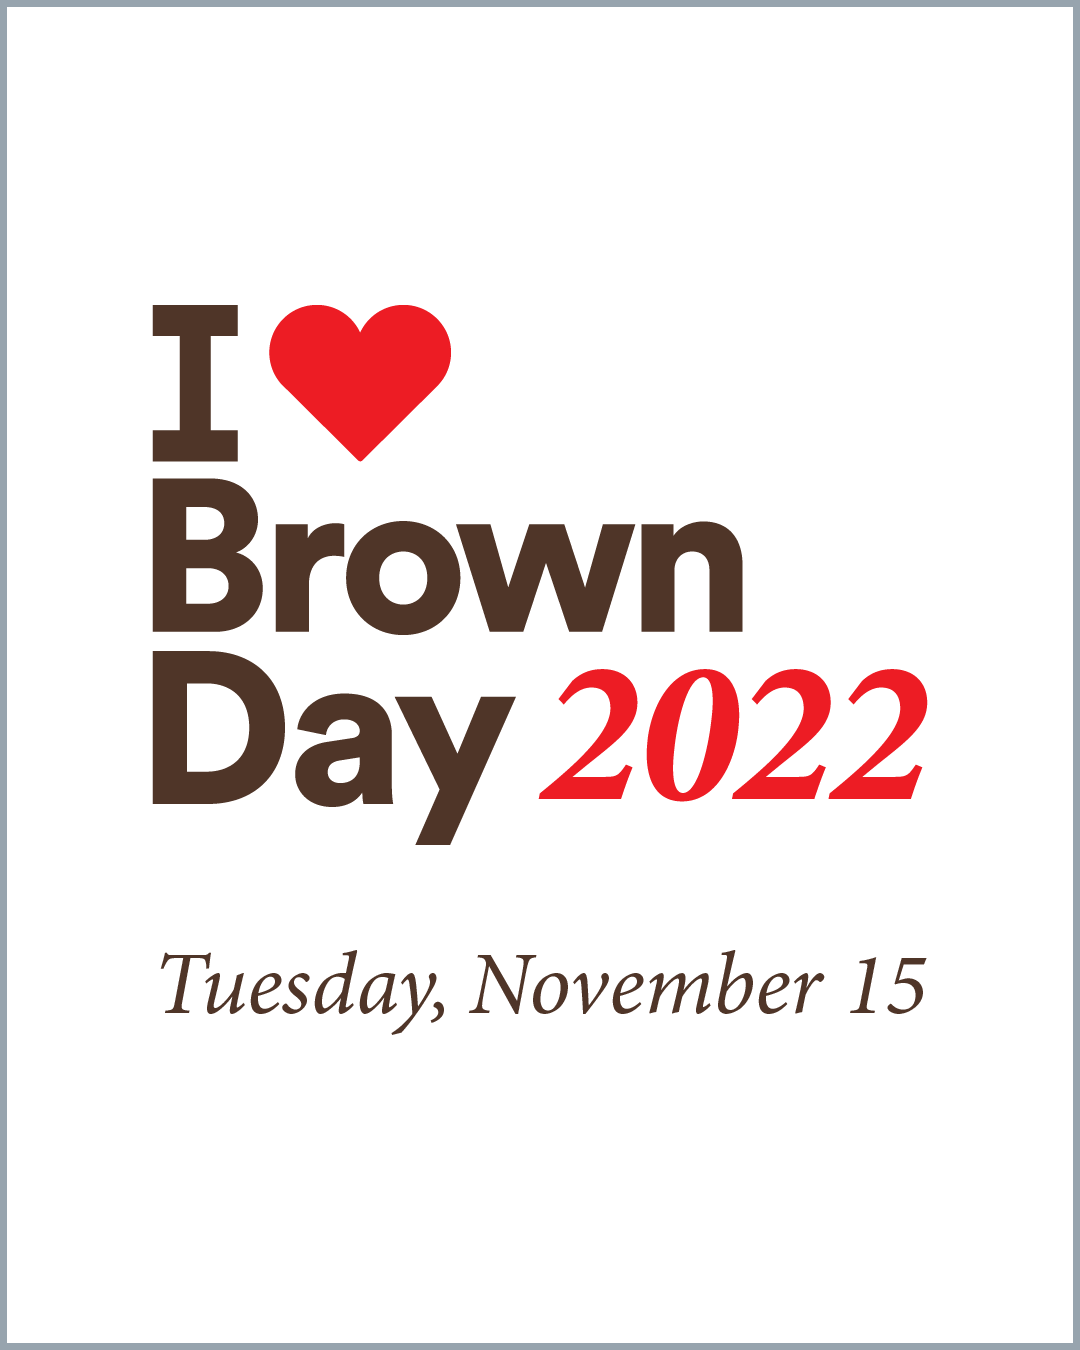 I Heart Brown Day logo in brown and red, with text reading November 15 below